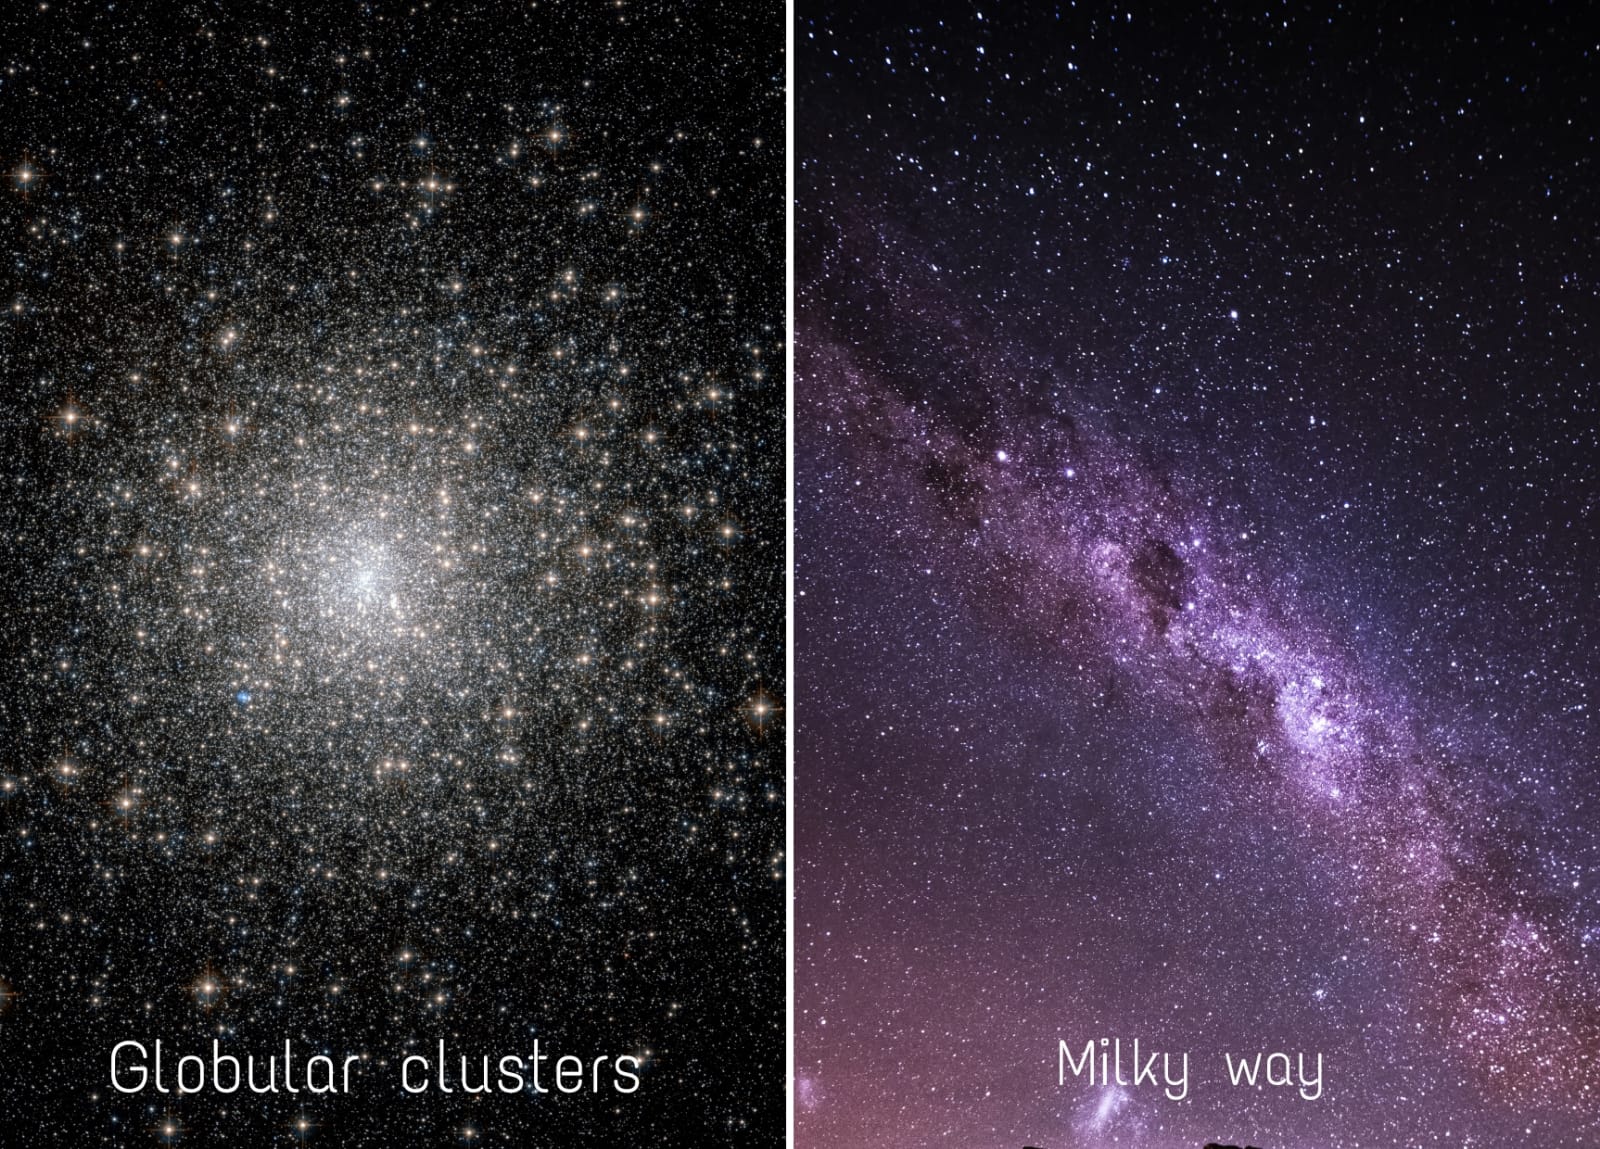 What is the relationship between globular clusters and milky way?